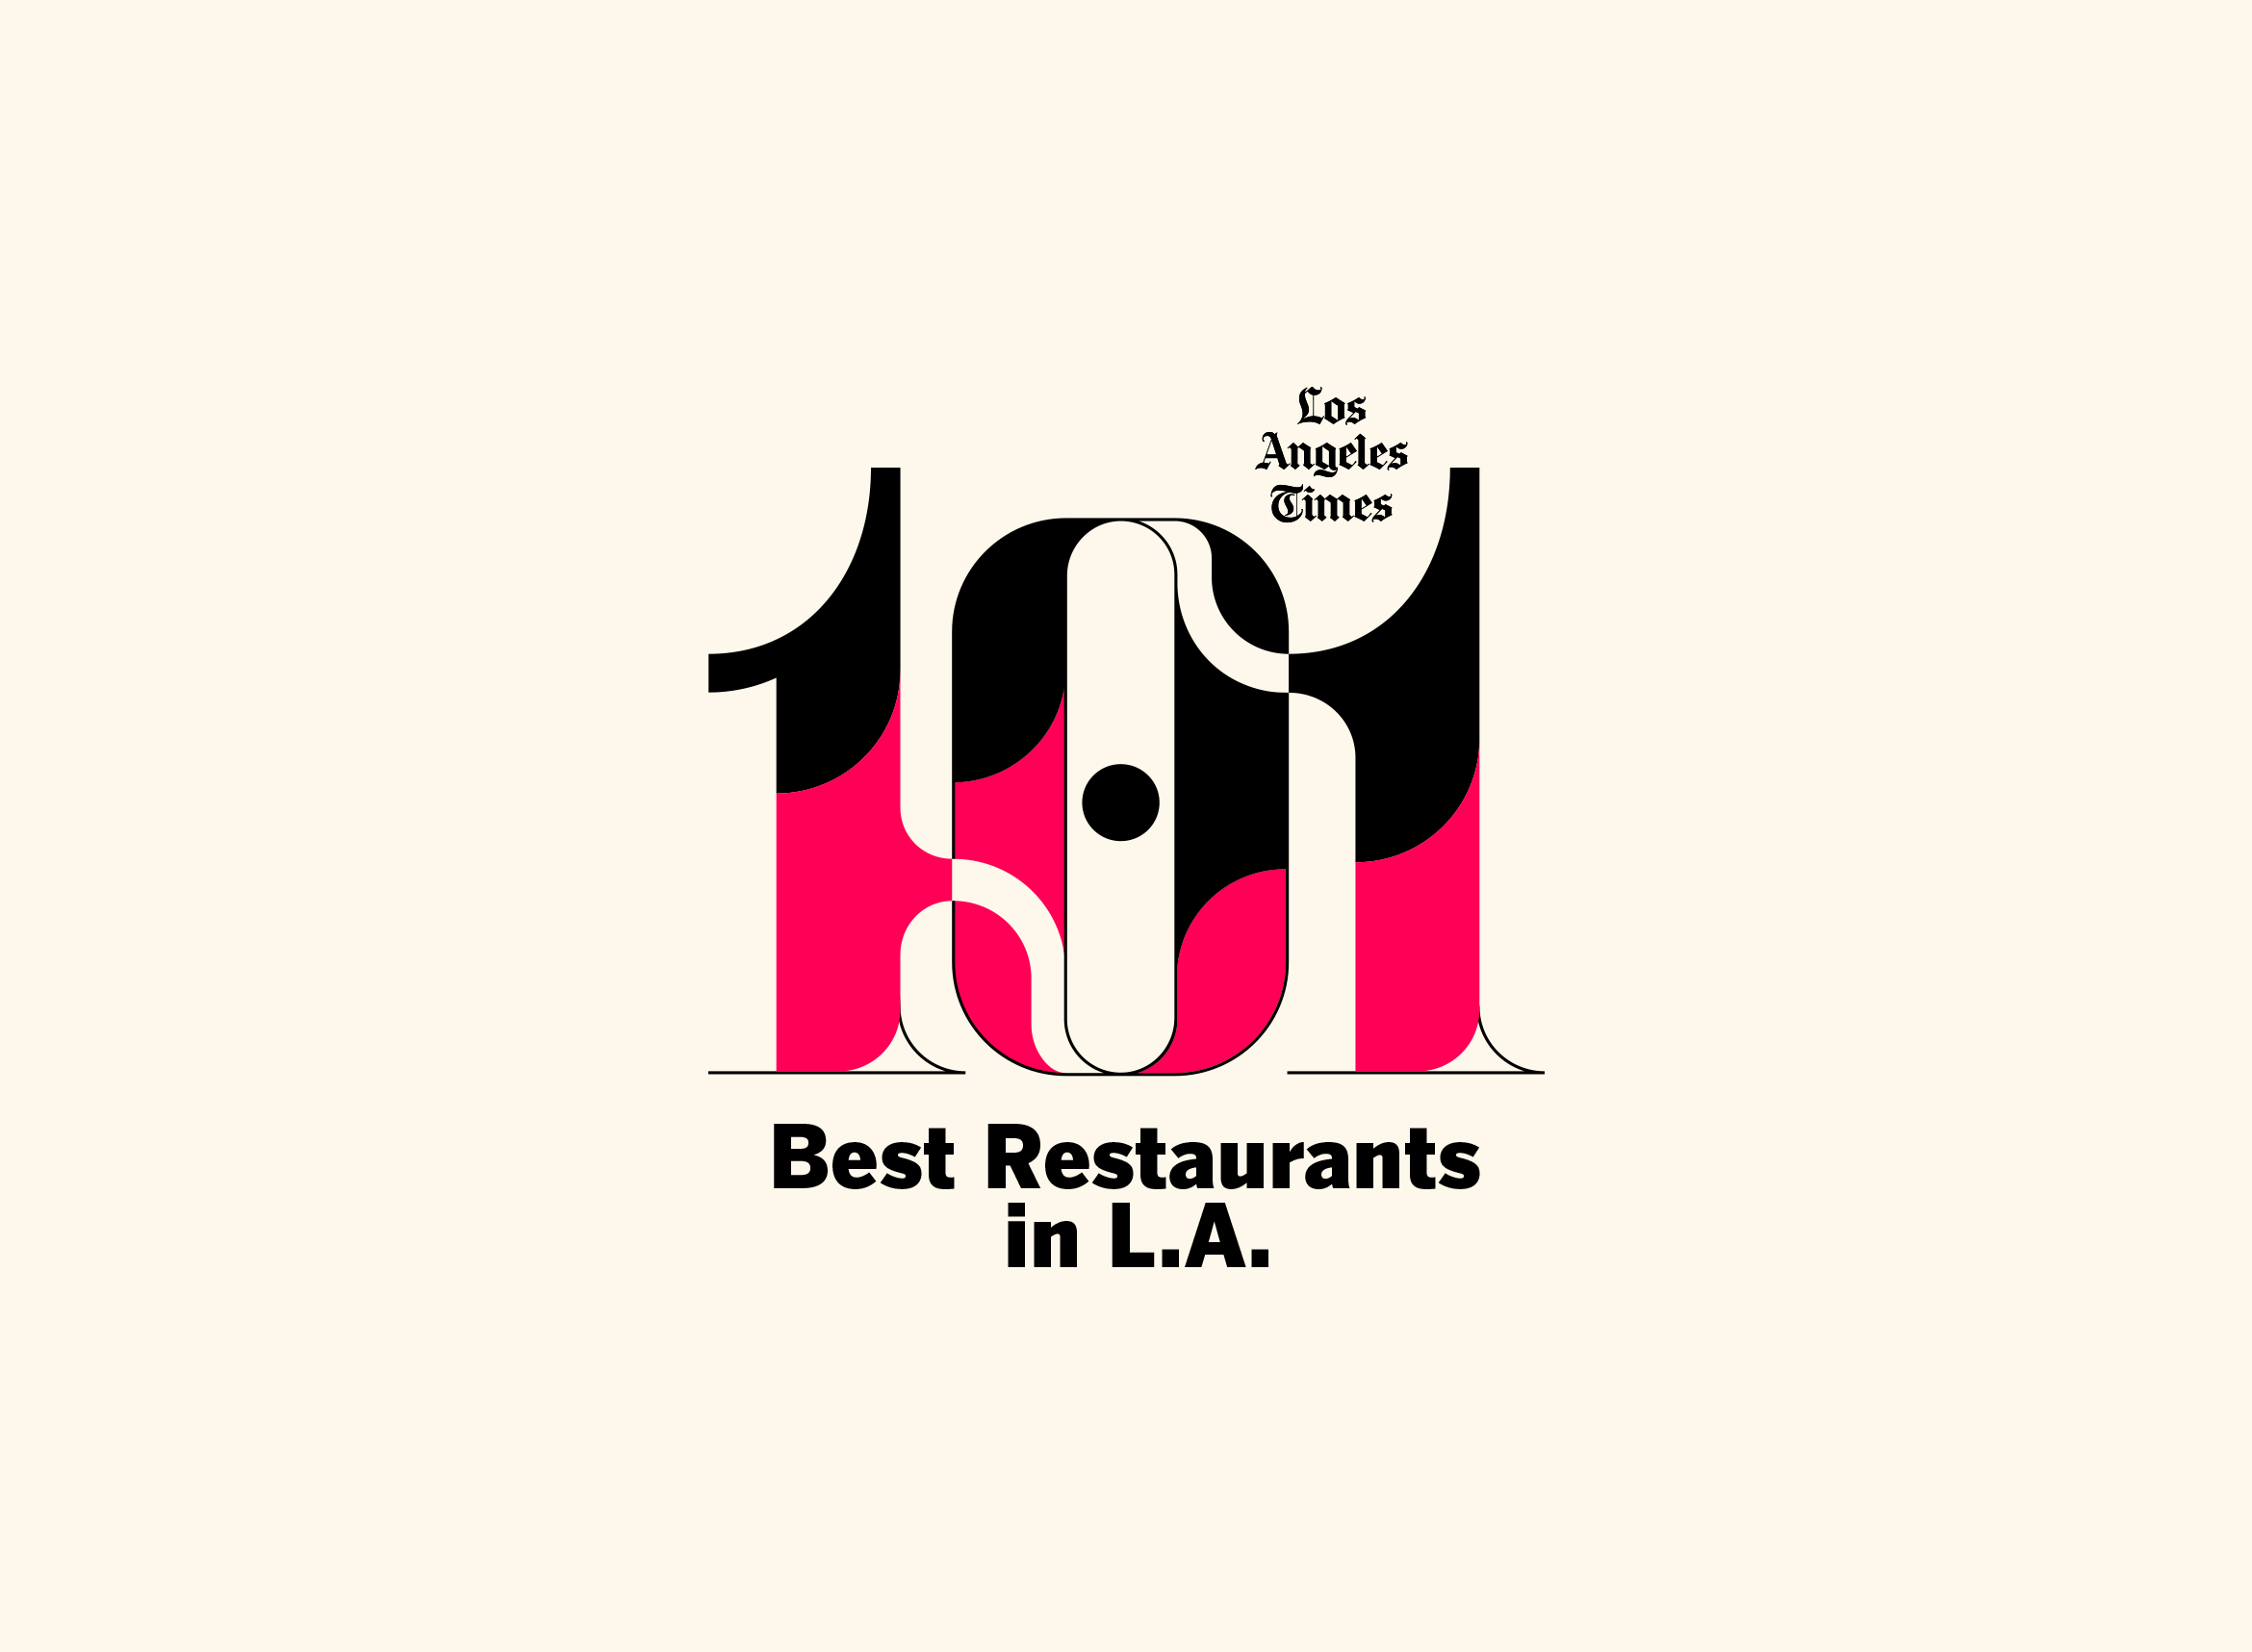 los angeles times 101 best restaurants in LA logo with funky 101 in red and black